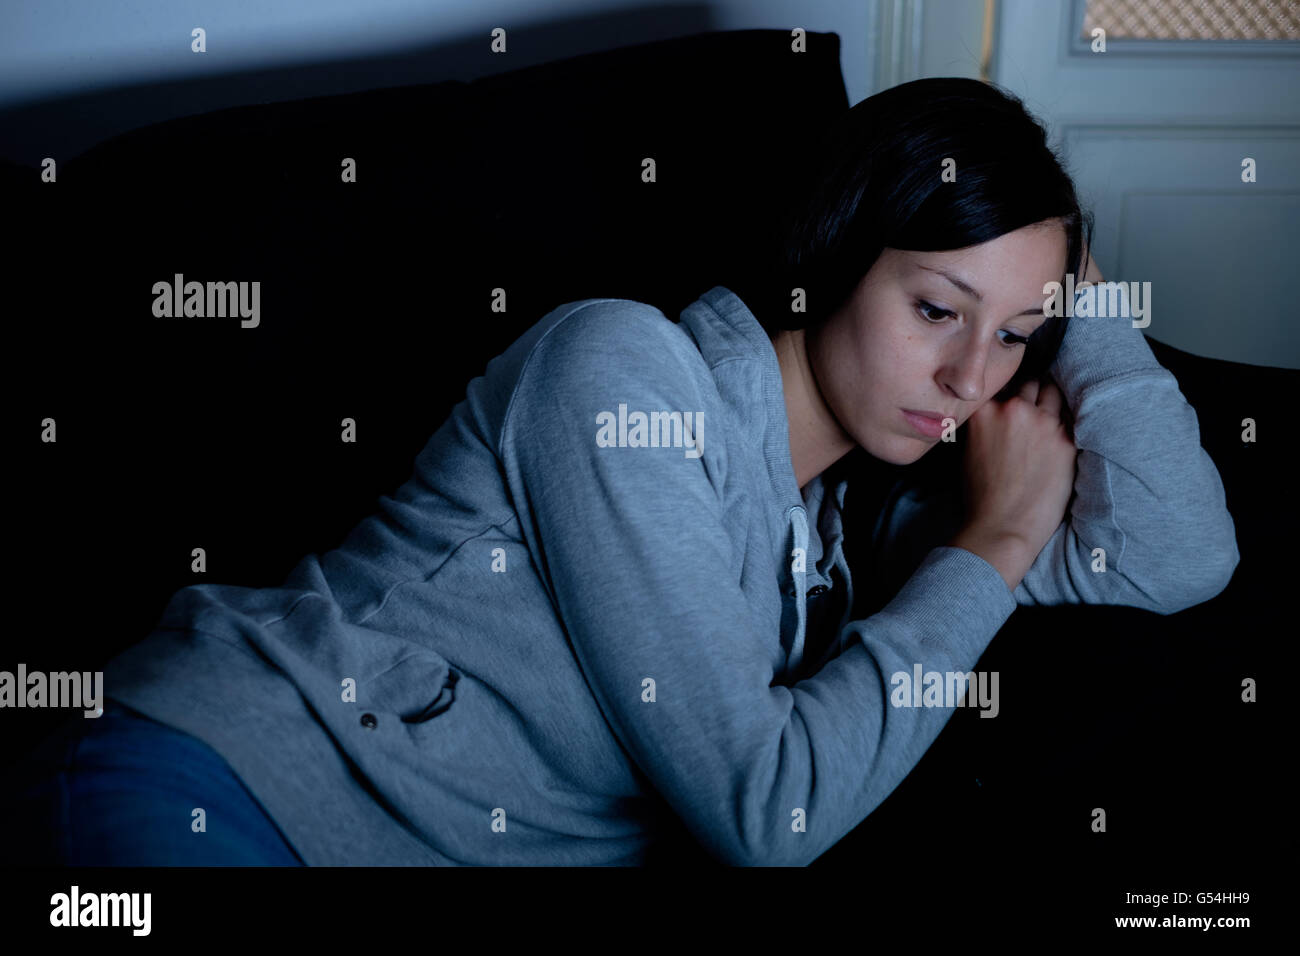 Sad depressed woman lying on the couch at night Stock Photo